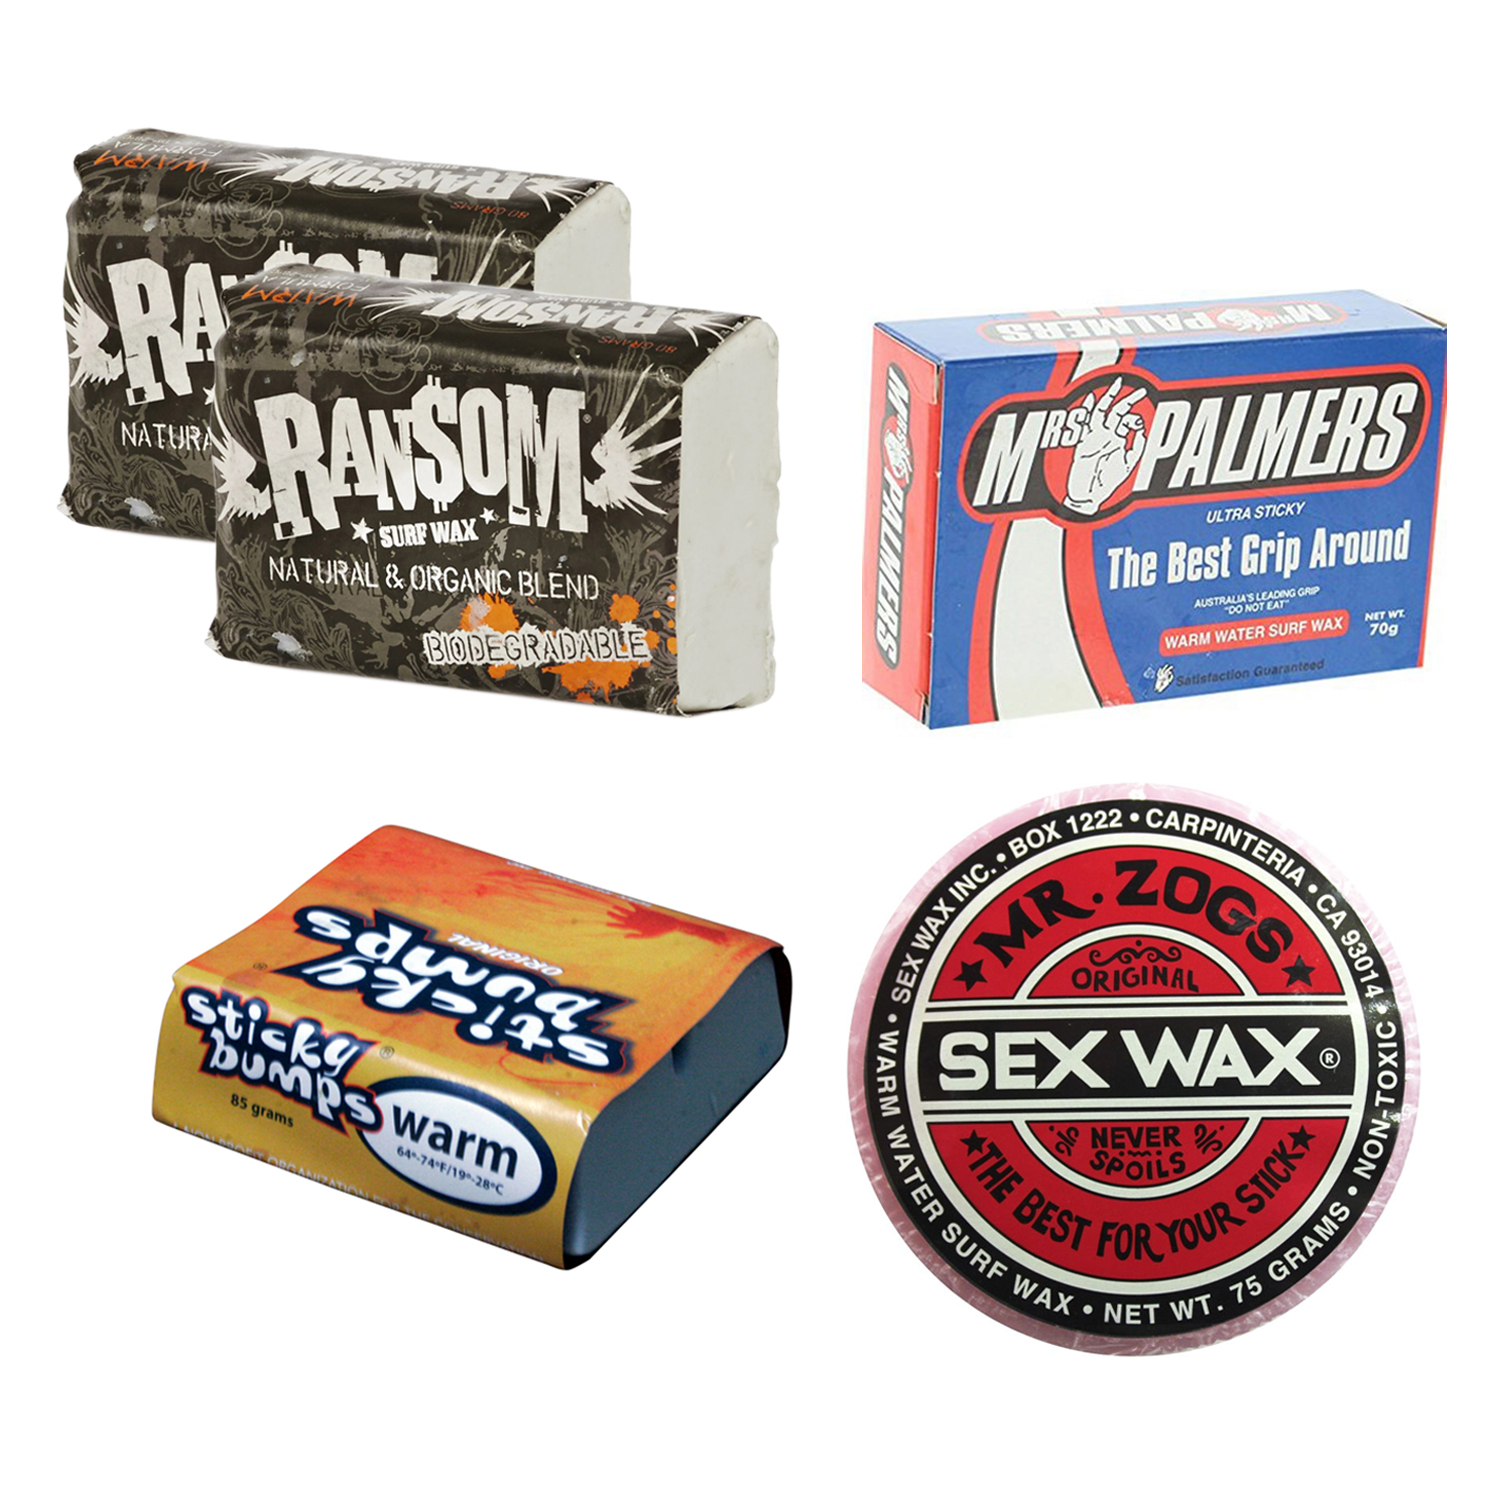 Mrs Palmers Cool Water Surf Wax 5 Pack.